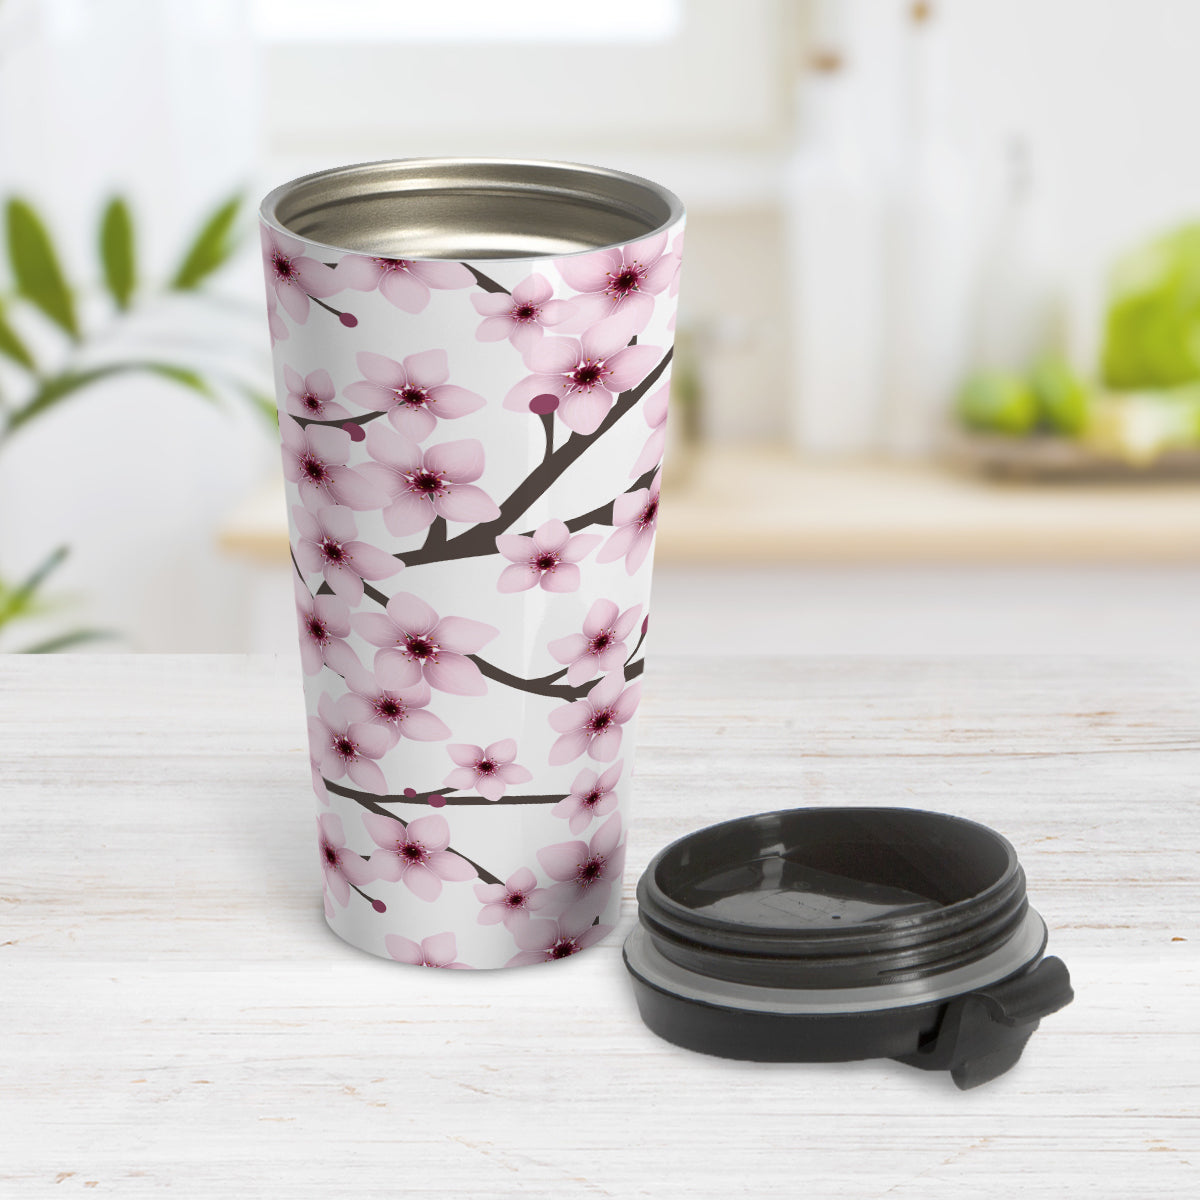 Cherry Blossom Travel Mug (15oz) at Amy's Coffee Mugs. A stainless steel insulated travel mug designed with a pattern of pink cherry blossom flowers on branches that wraps around the travel mug. Photo shows the travel mug open with the lid on the table beside it.